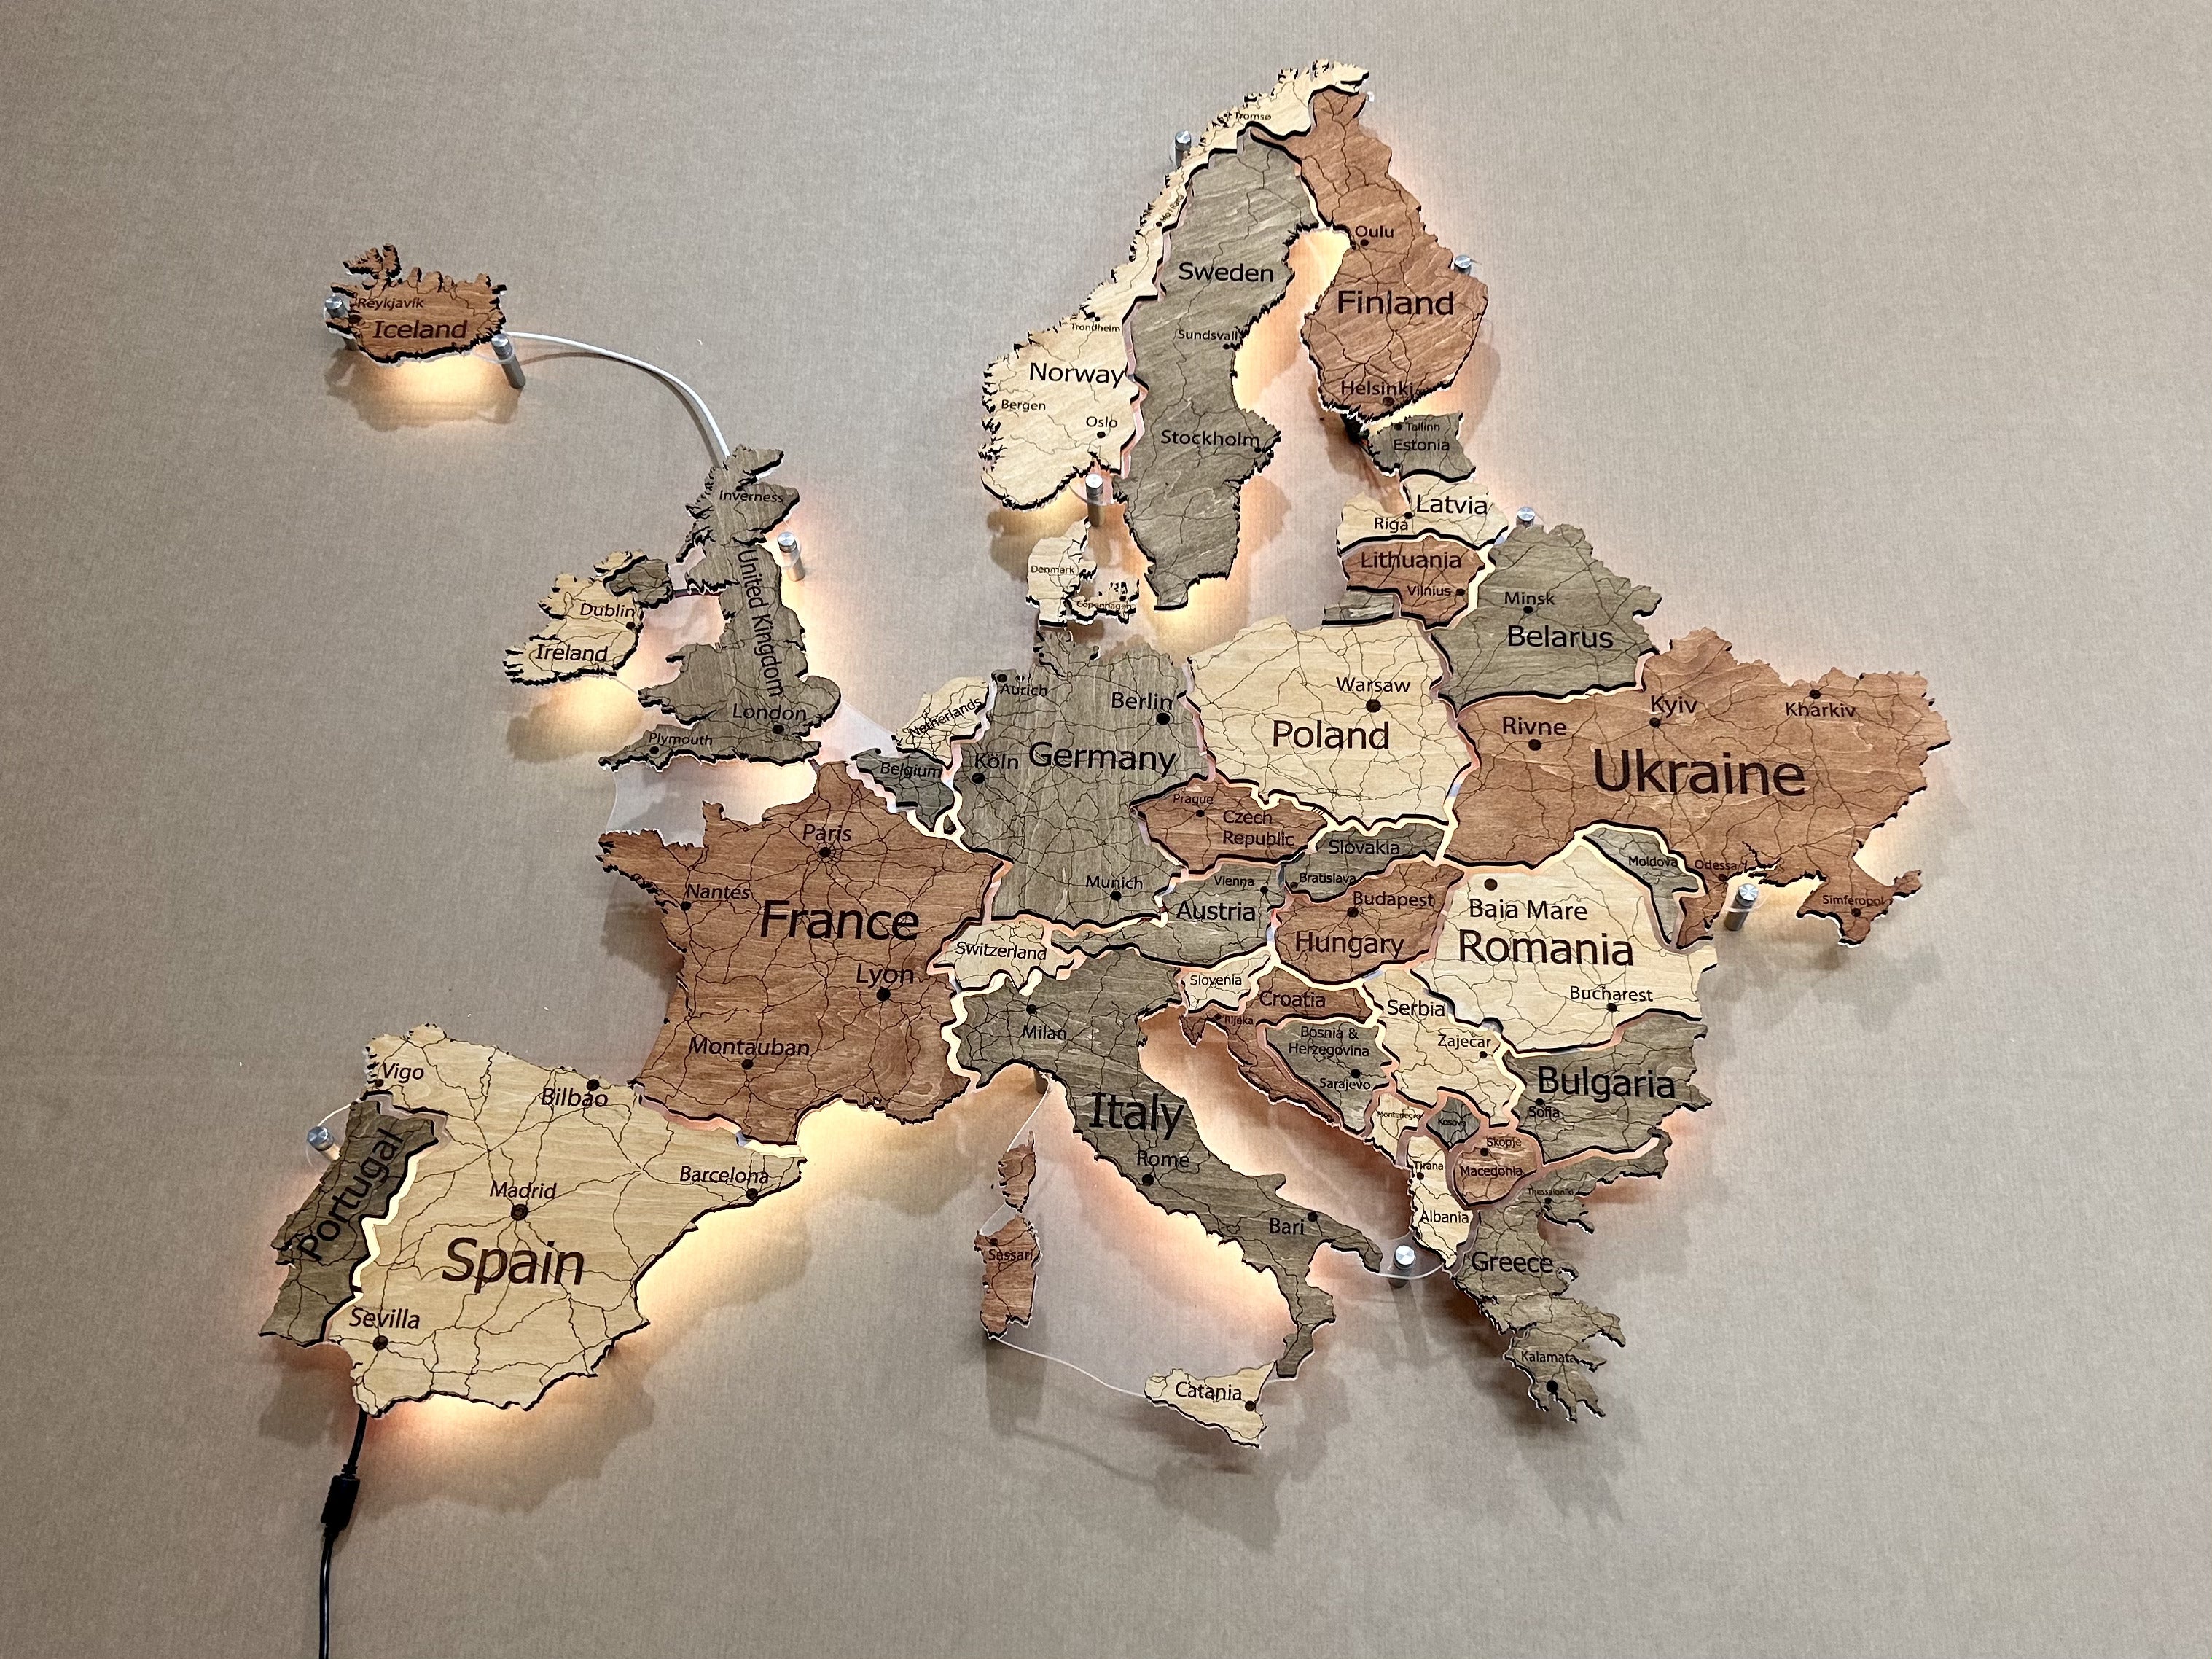 europe-led-map-on-acrylic-glass-with-backlighting-between-countries-color-warm